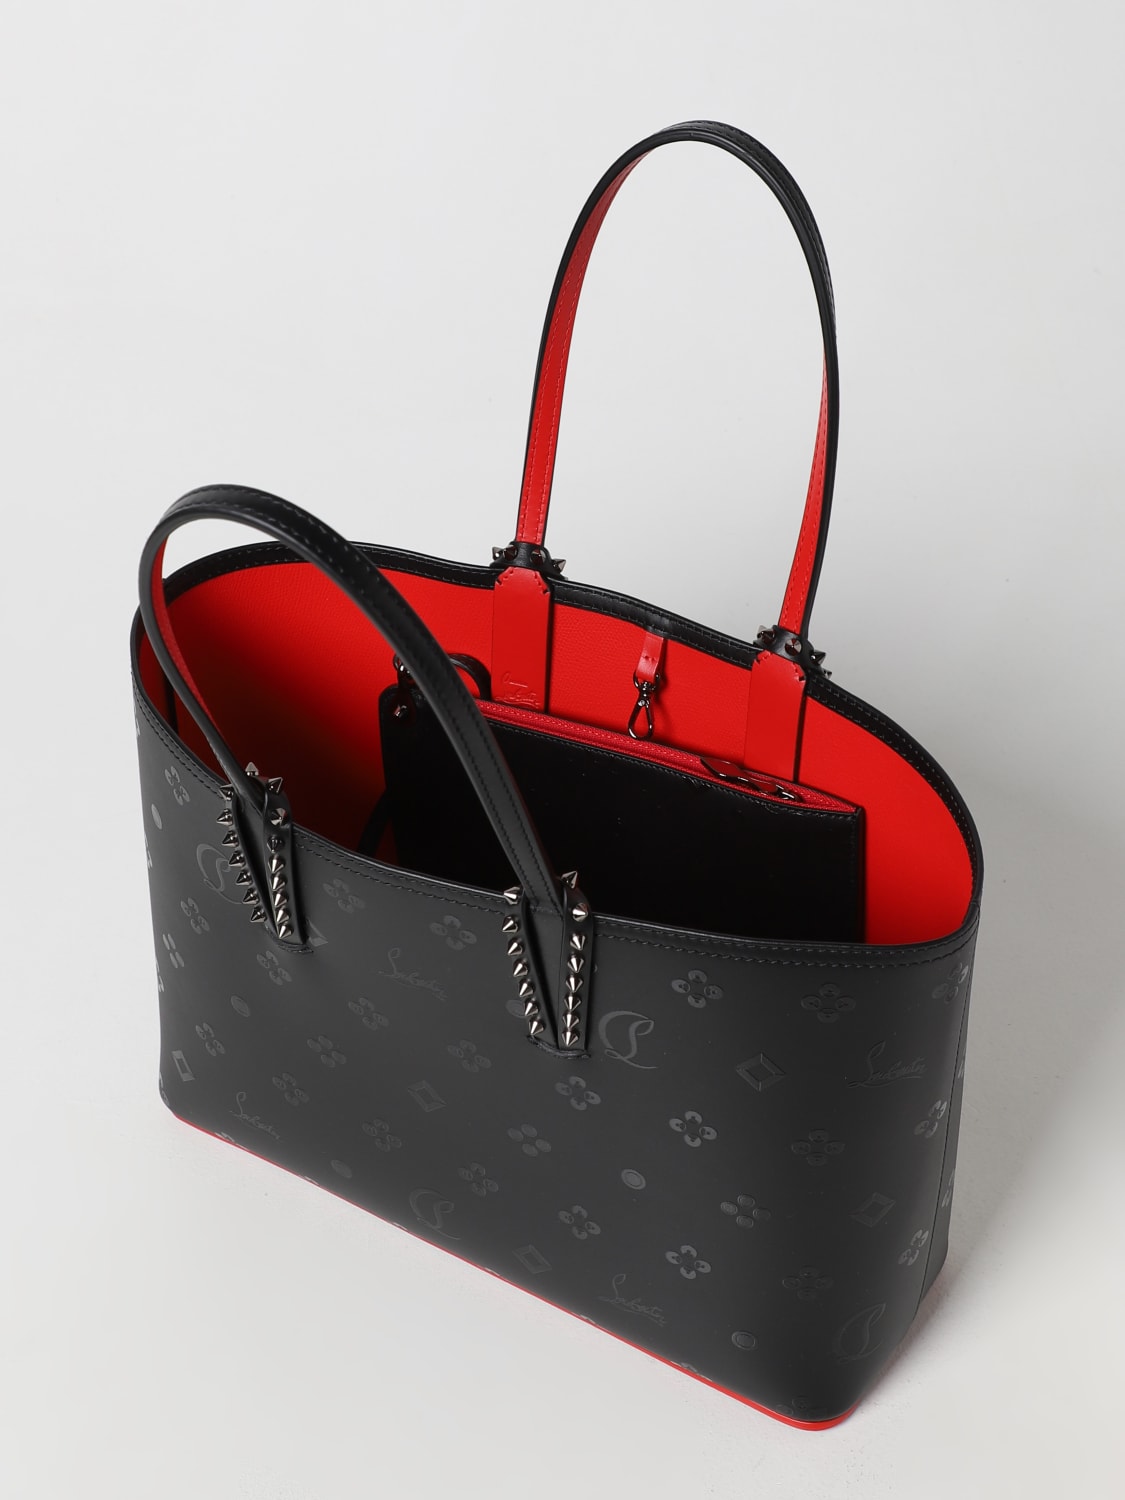 CHRISTIAN LOUBOUTIN: Cabata bag in leather - Black  Christian Louboutin  tote bags 1235008 online at